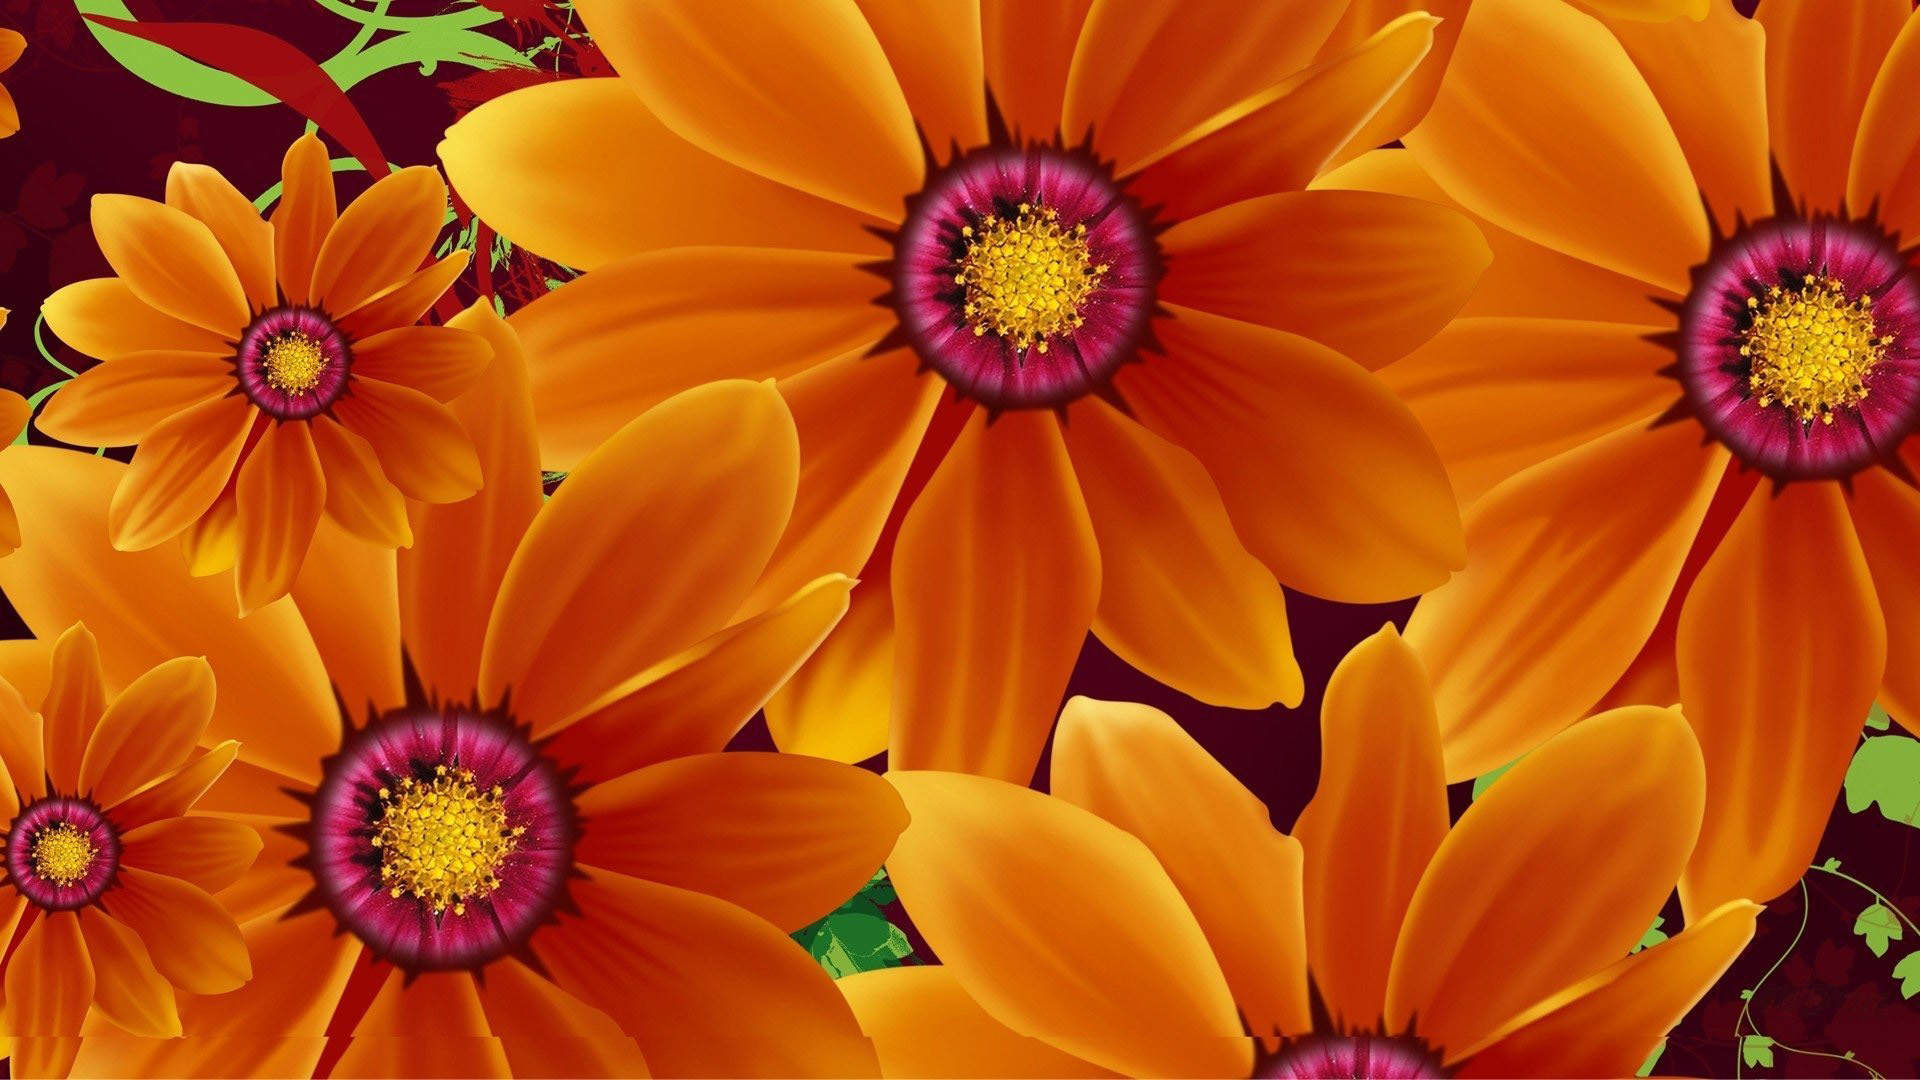 hd wallpaper for mobile 1920x1080 download,flower,petal,orange,african daisy,yellow